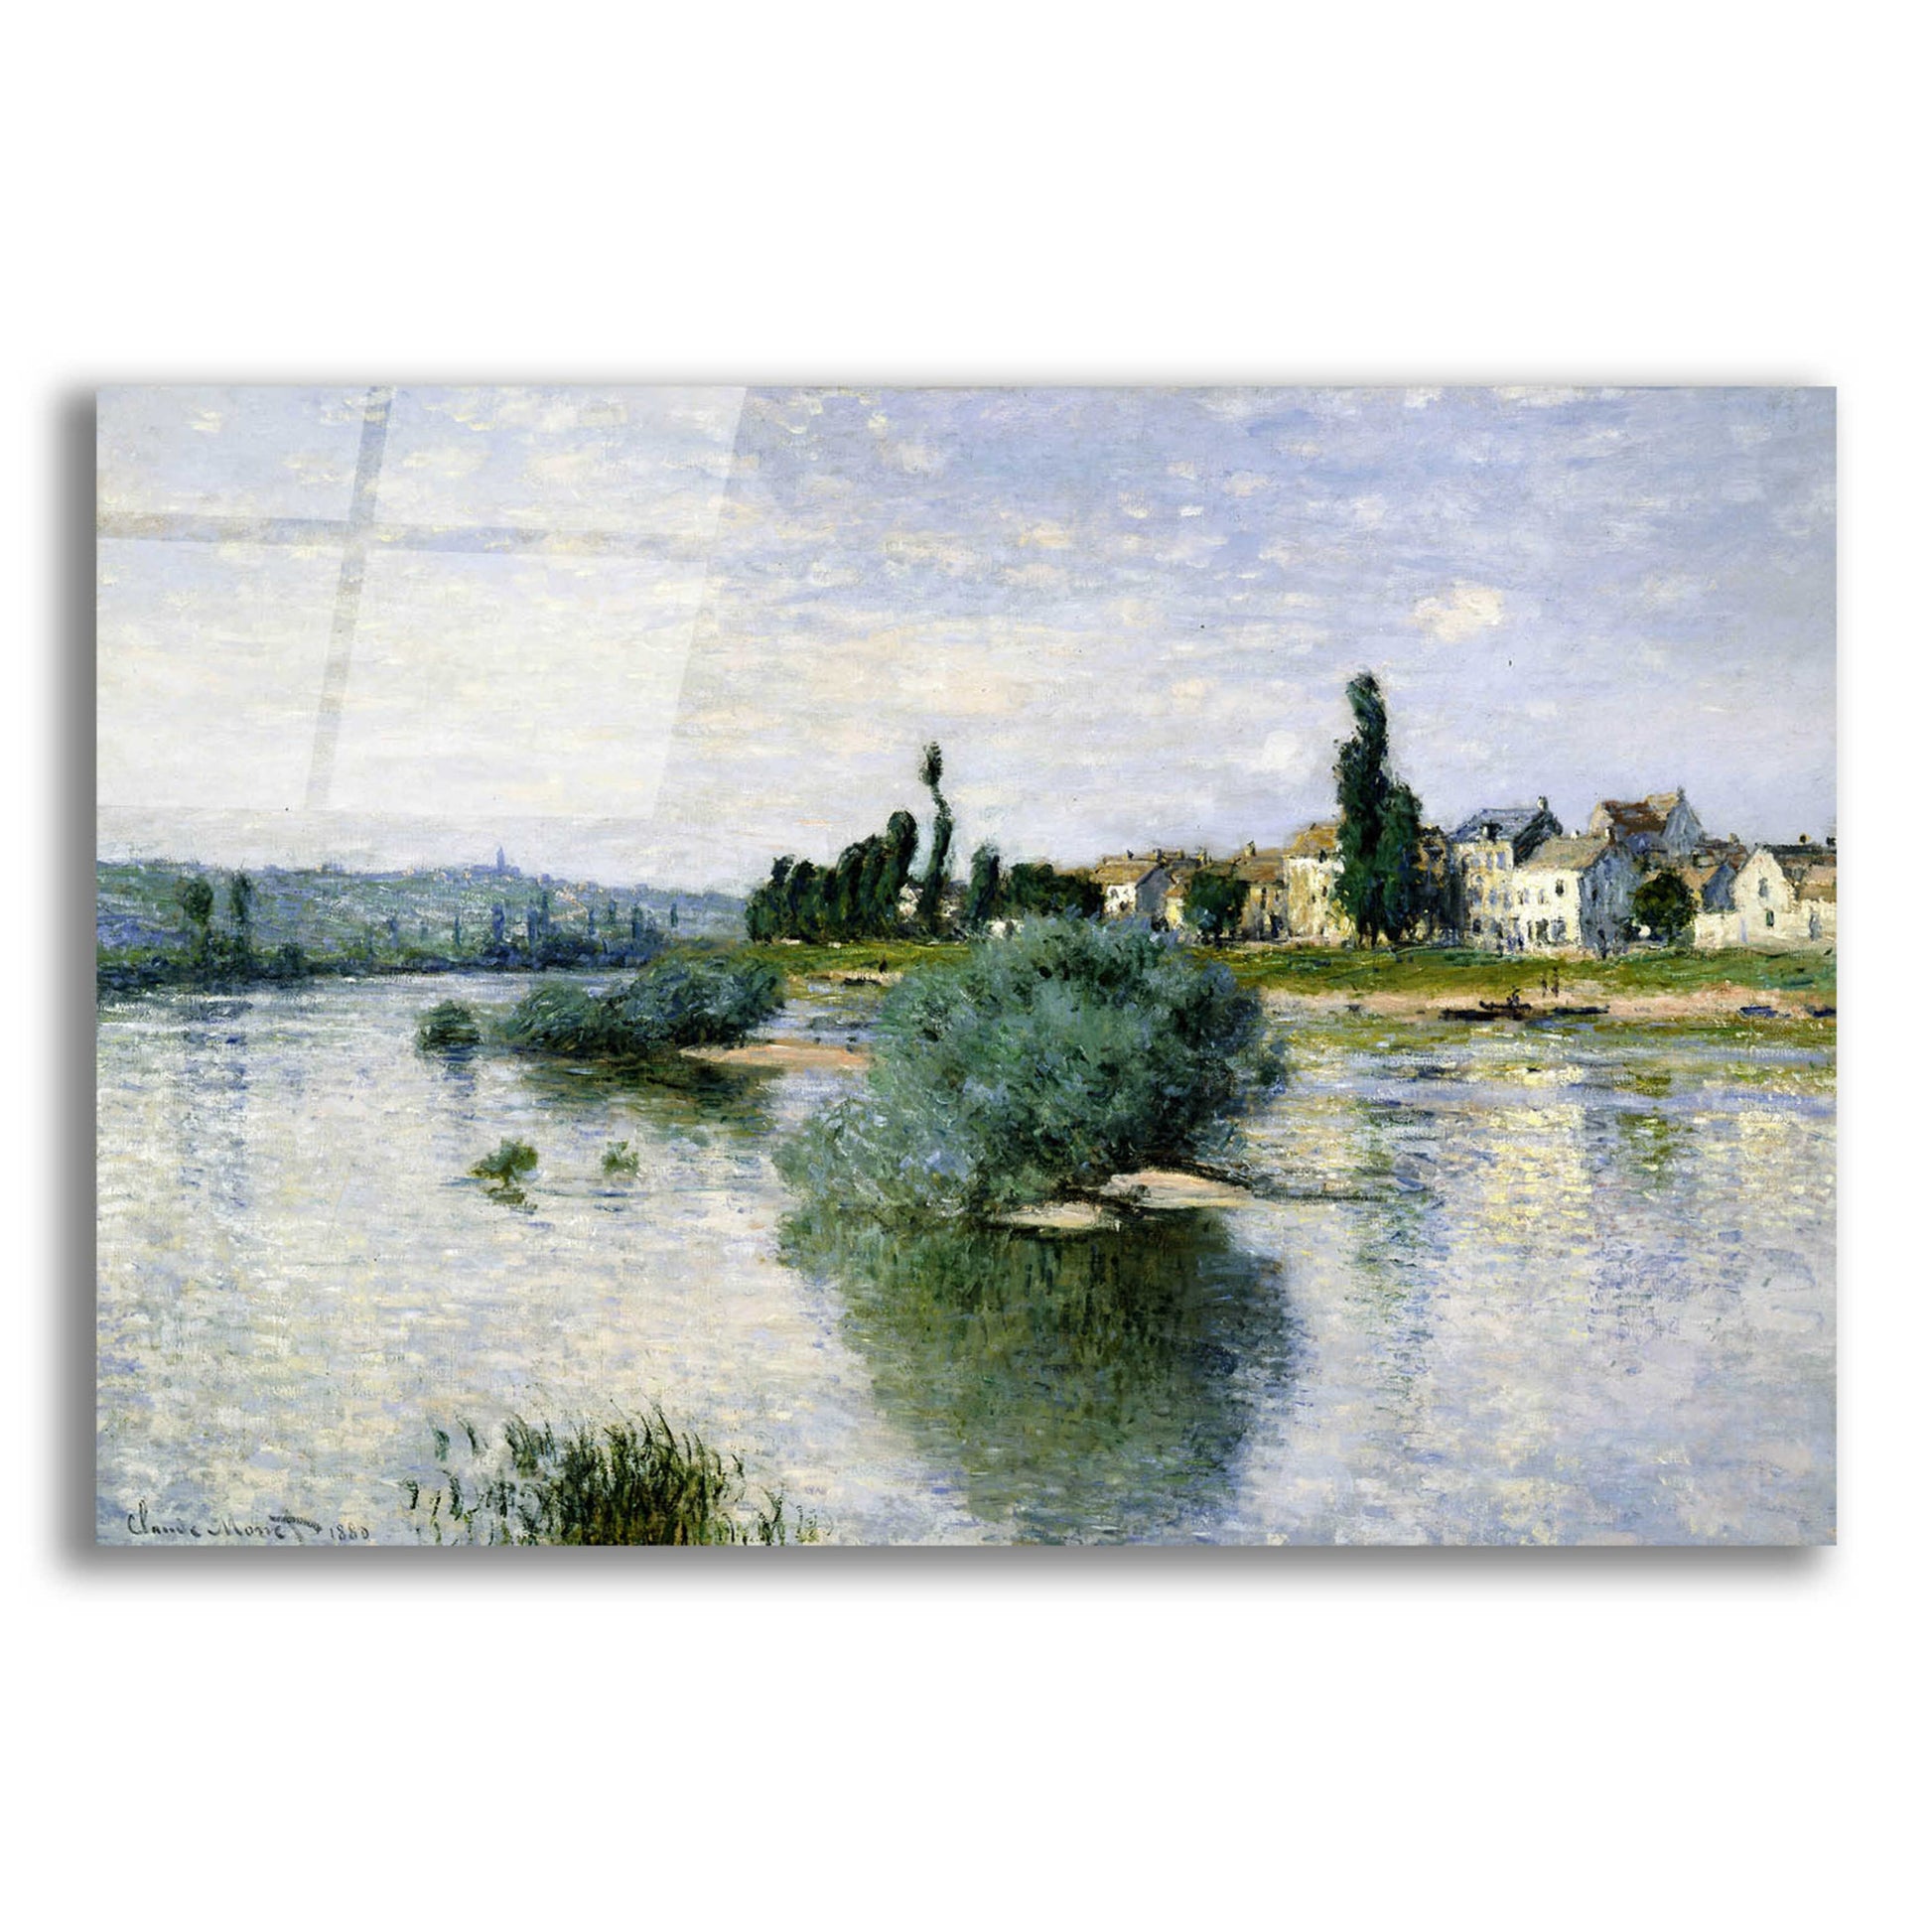 Epic Art 'The Seine At Lavacourt' by Claude Monet, Acrylic Glass Wall Art,16x12